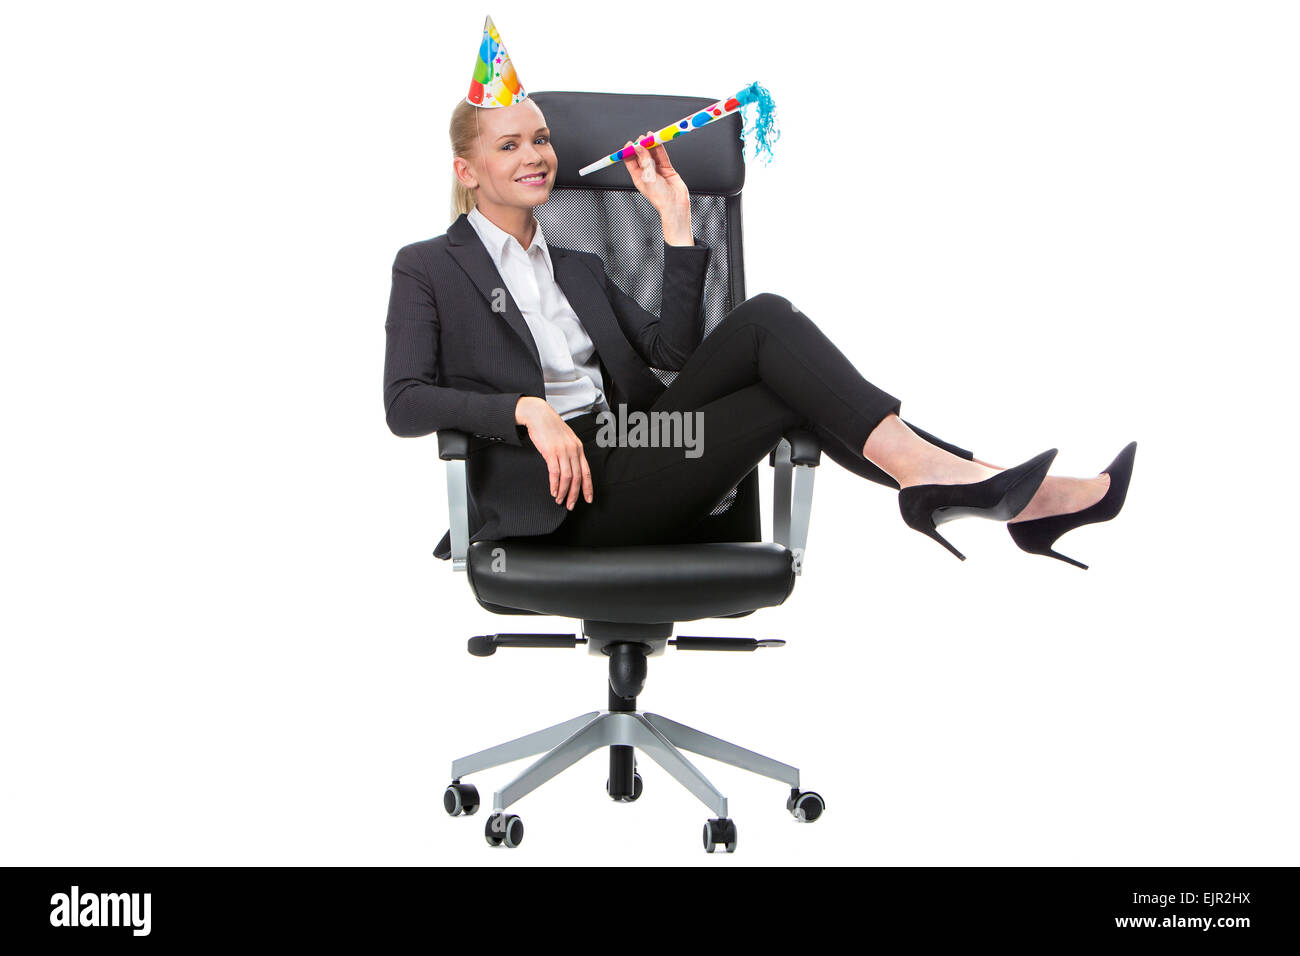 blonde businesswoman smiling and having fun during a party in the office Stock Photo